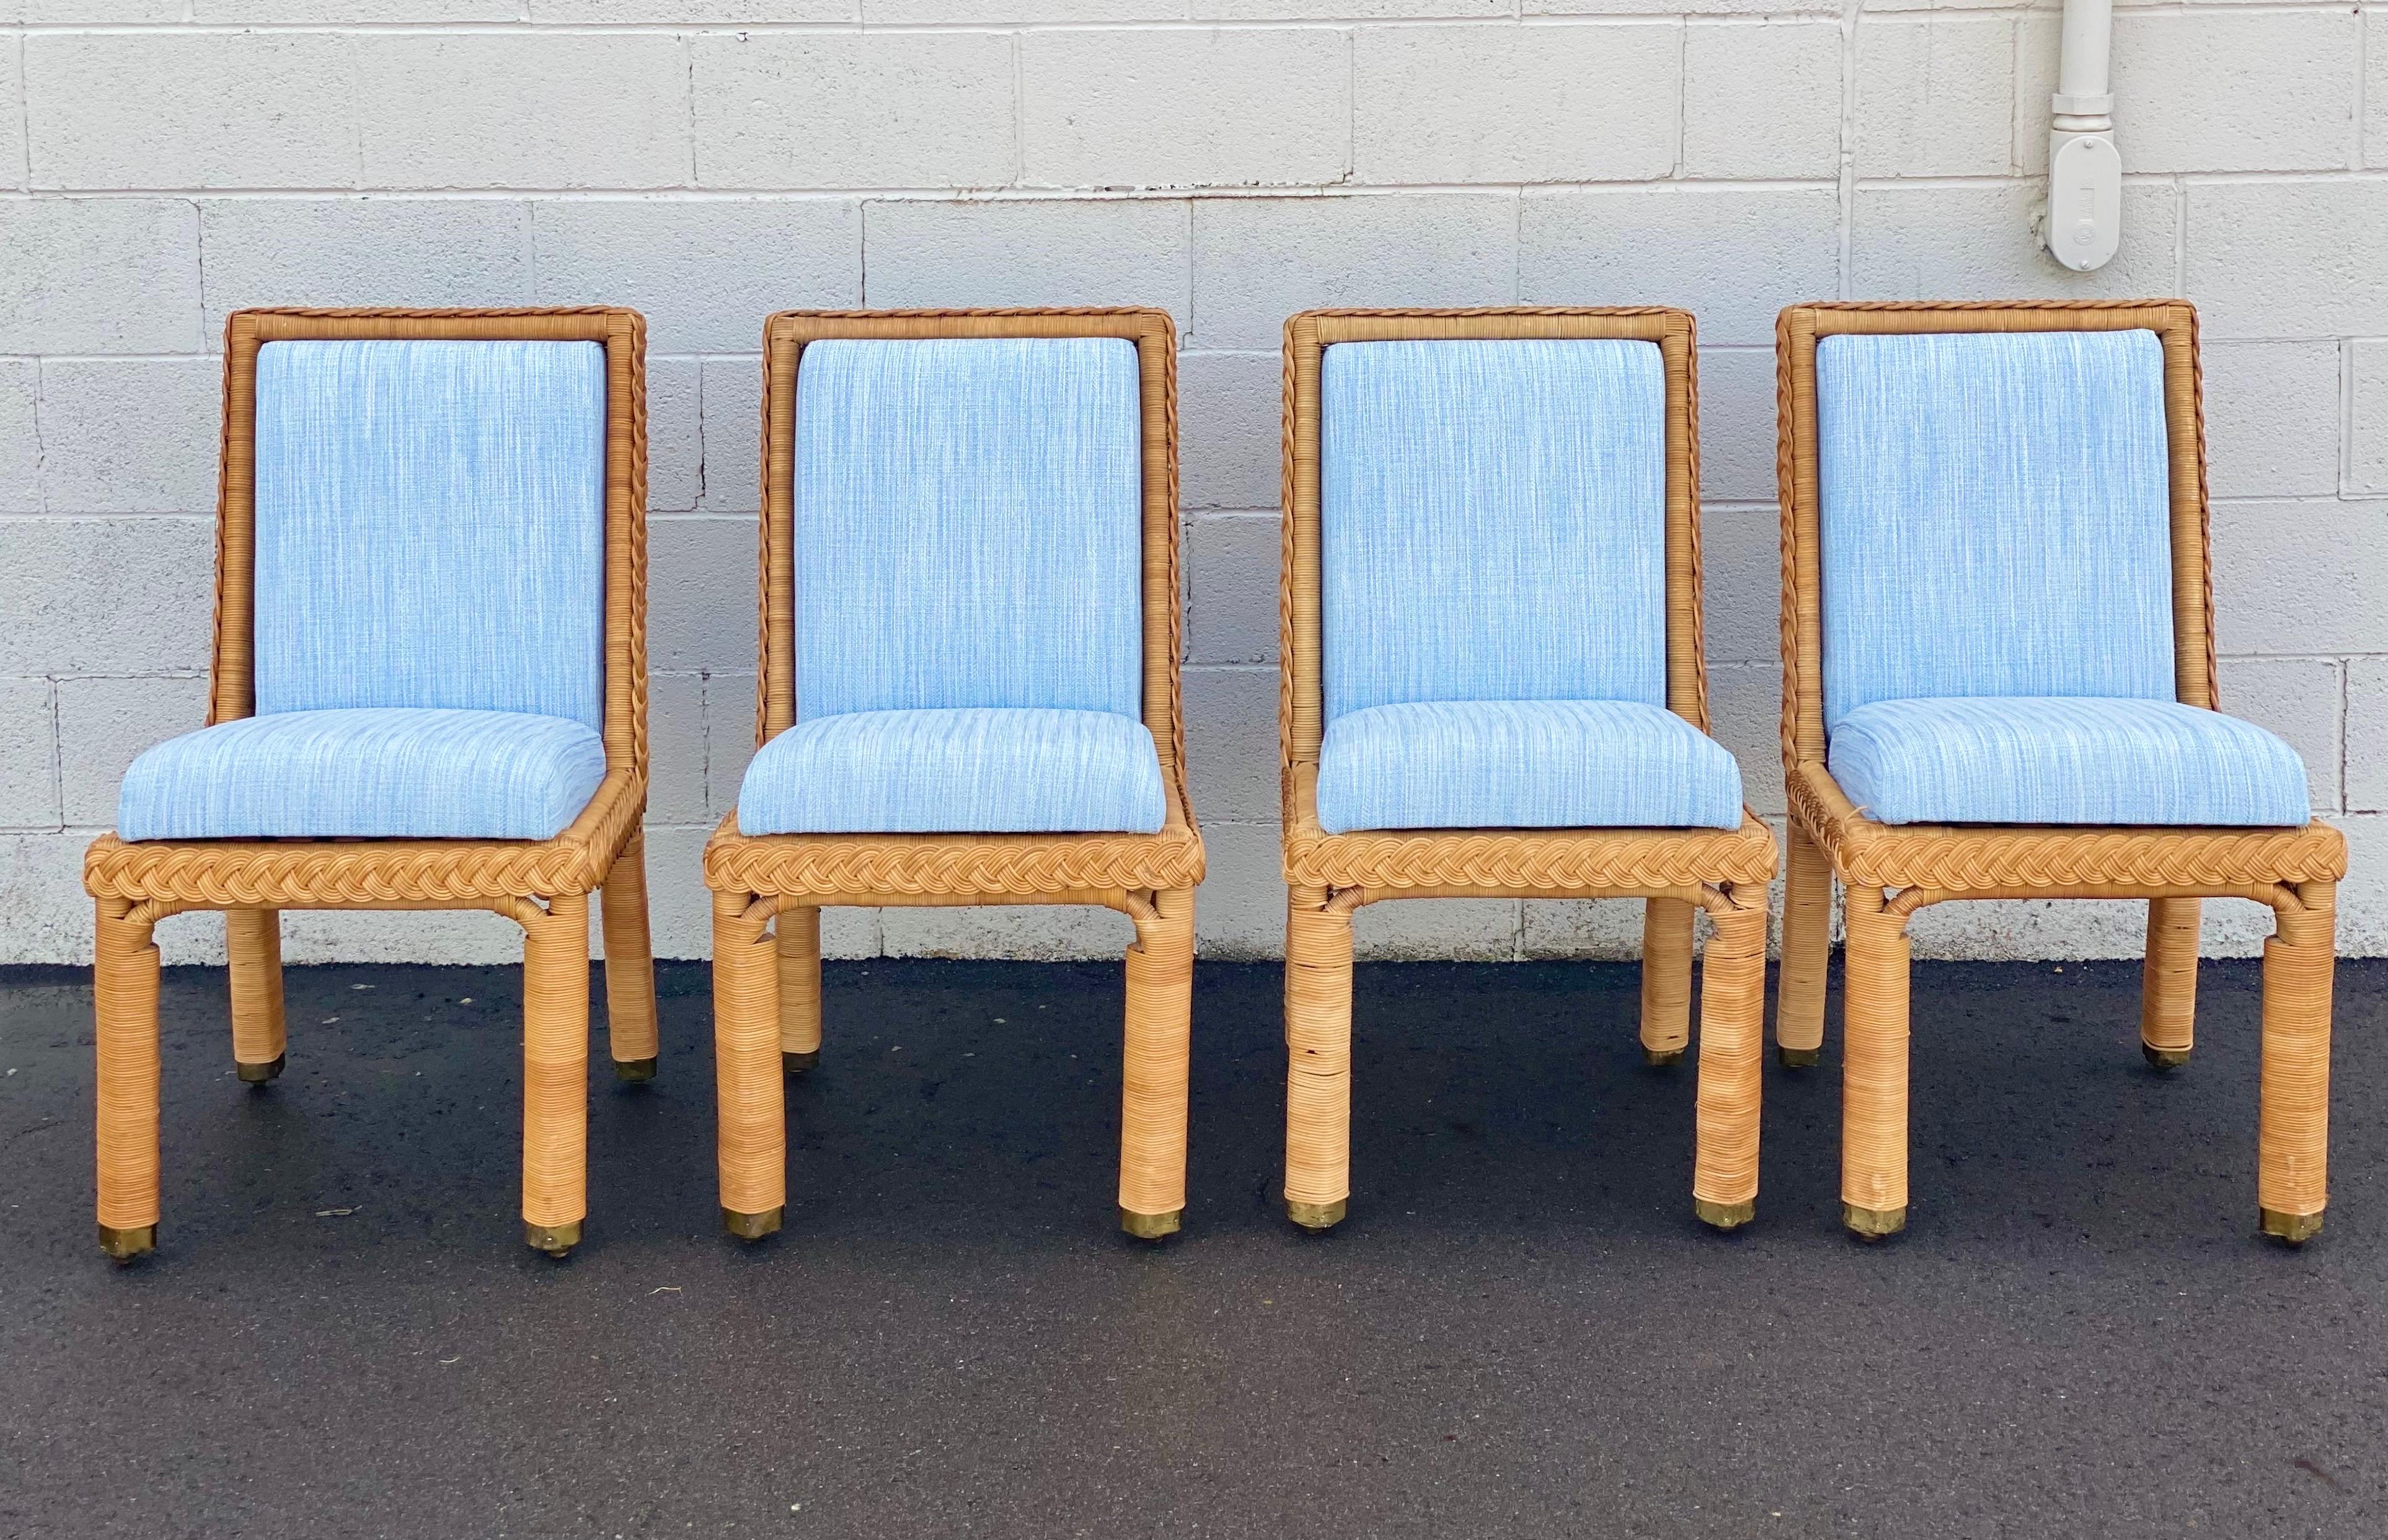 We are very pleased to offer an organic, sculptural set of six dining chairs, circa the 1960s. This stunning set has been beautifully handcrafted in a warm maple tone rattan that captures the beauty of wicker. All six chairs have been professionally